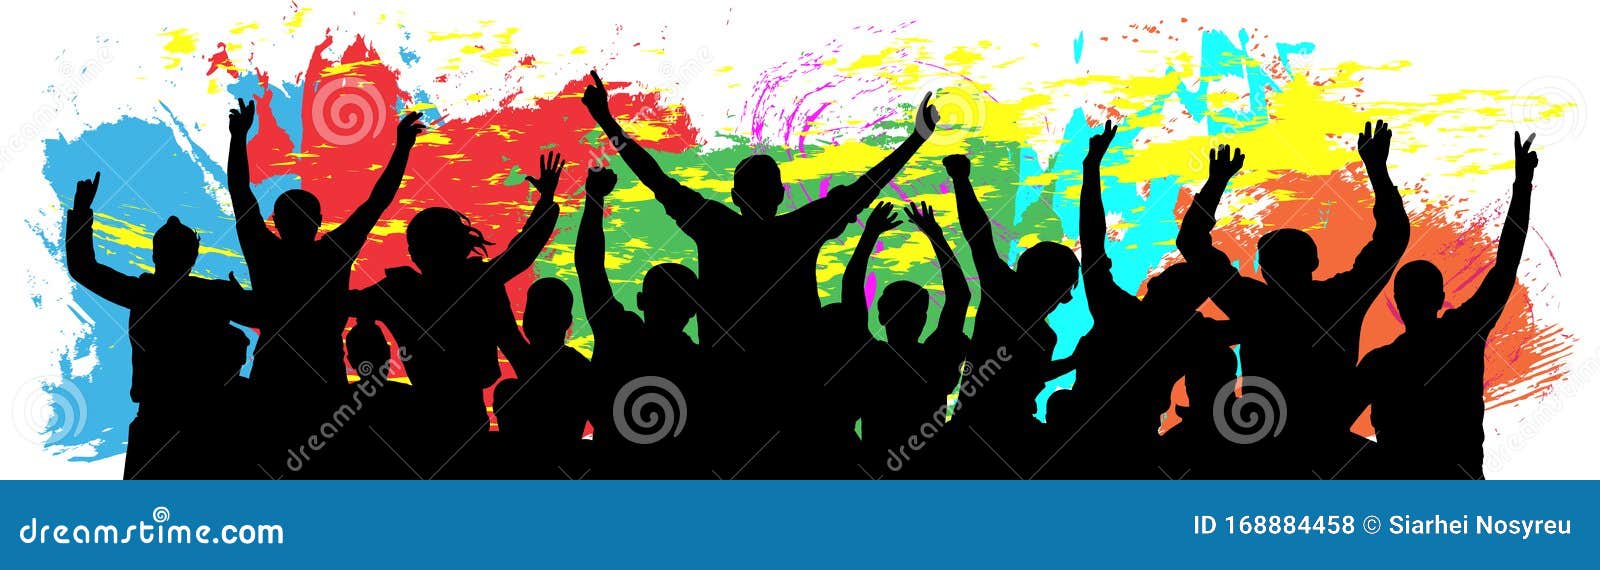 people celebrate silhouette. cheer youth. crowd friends cheer. colorful background  